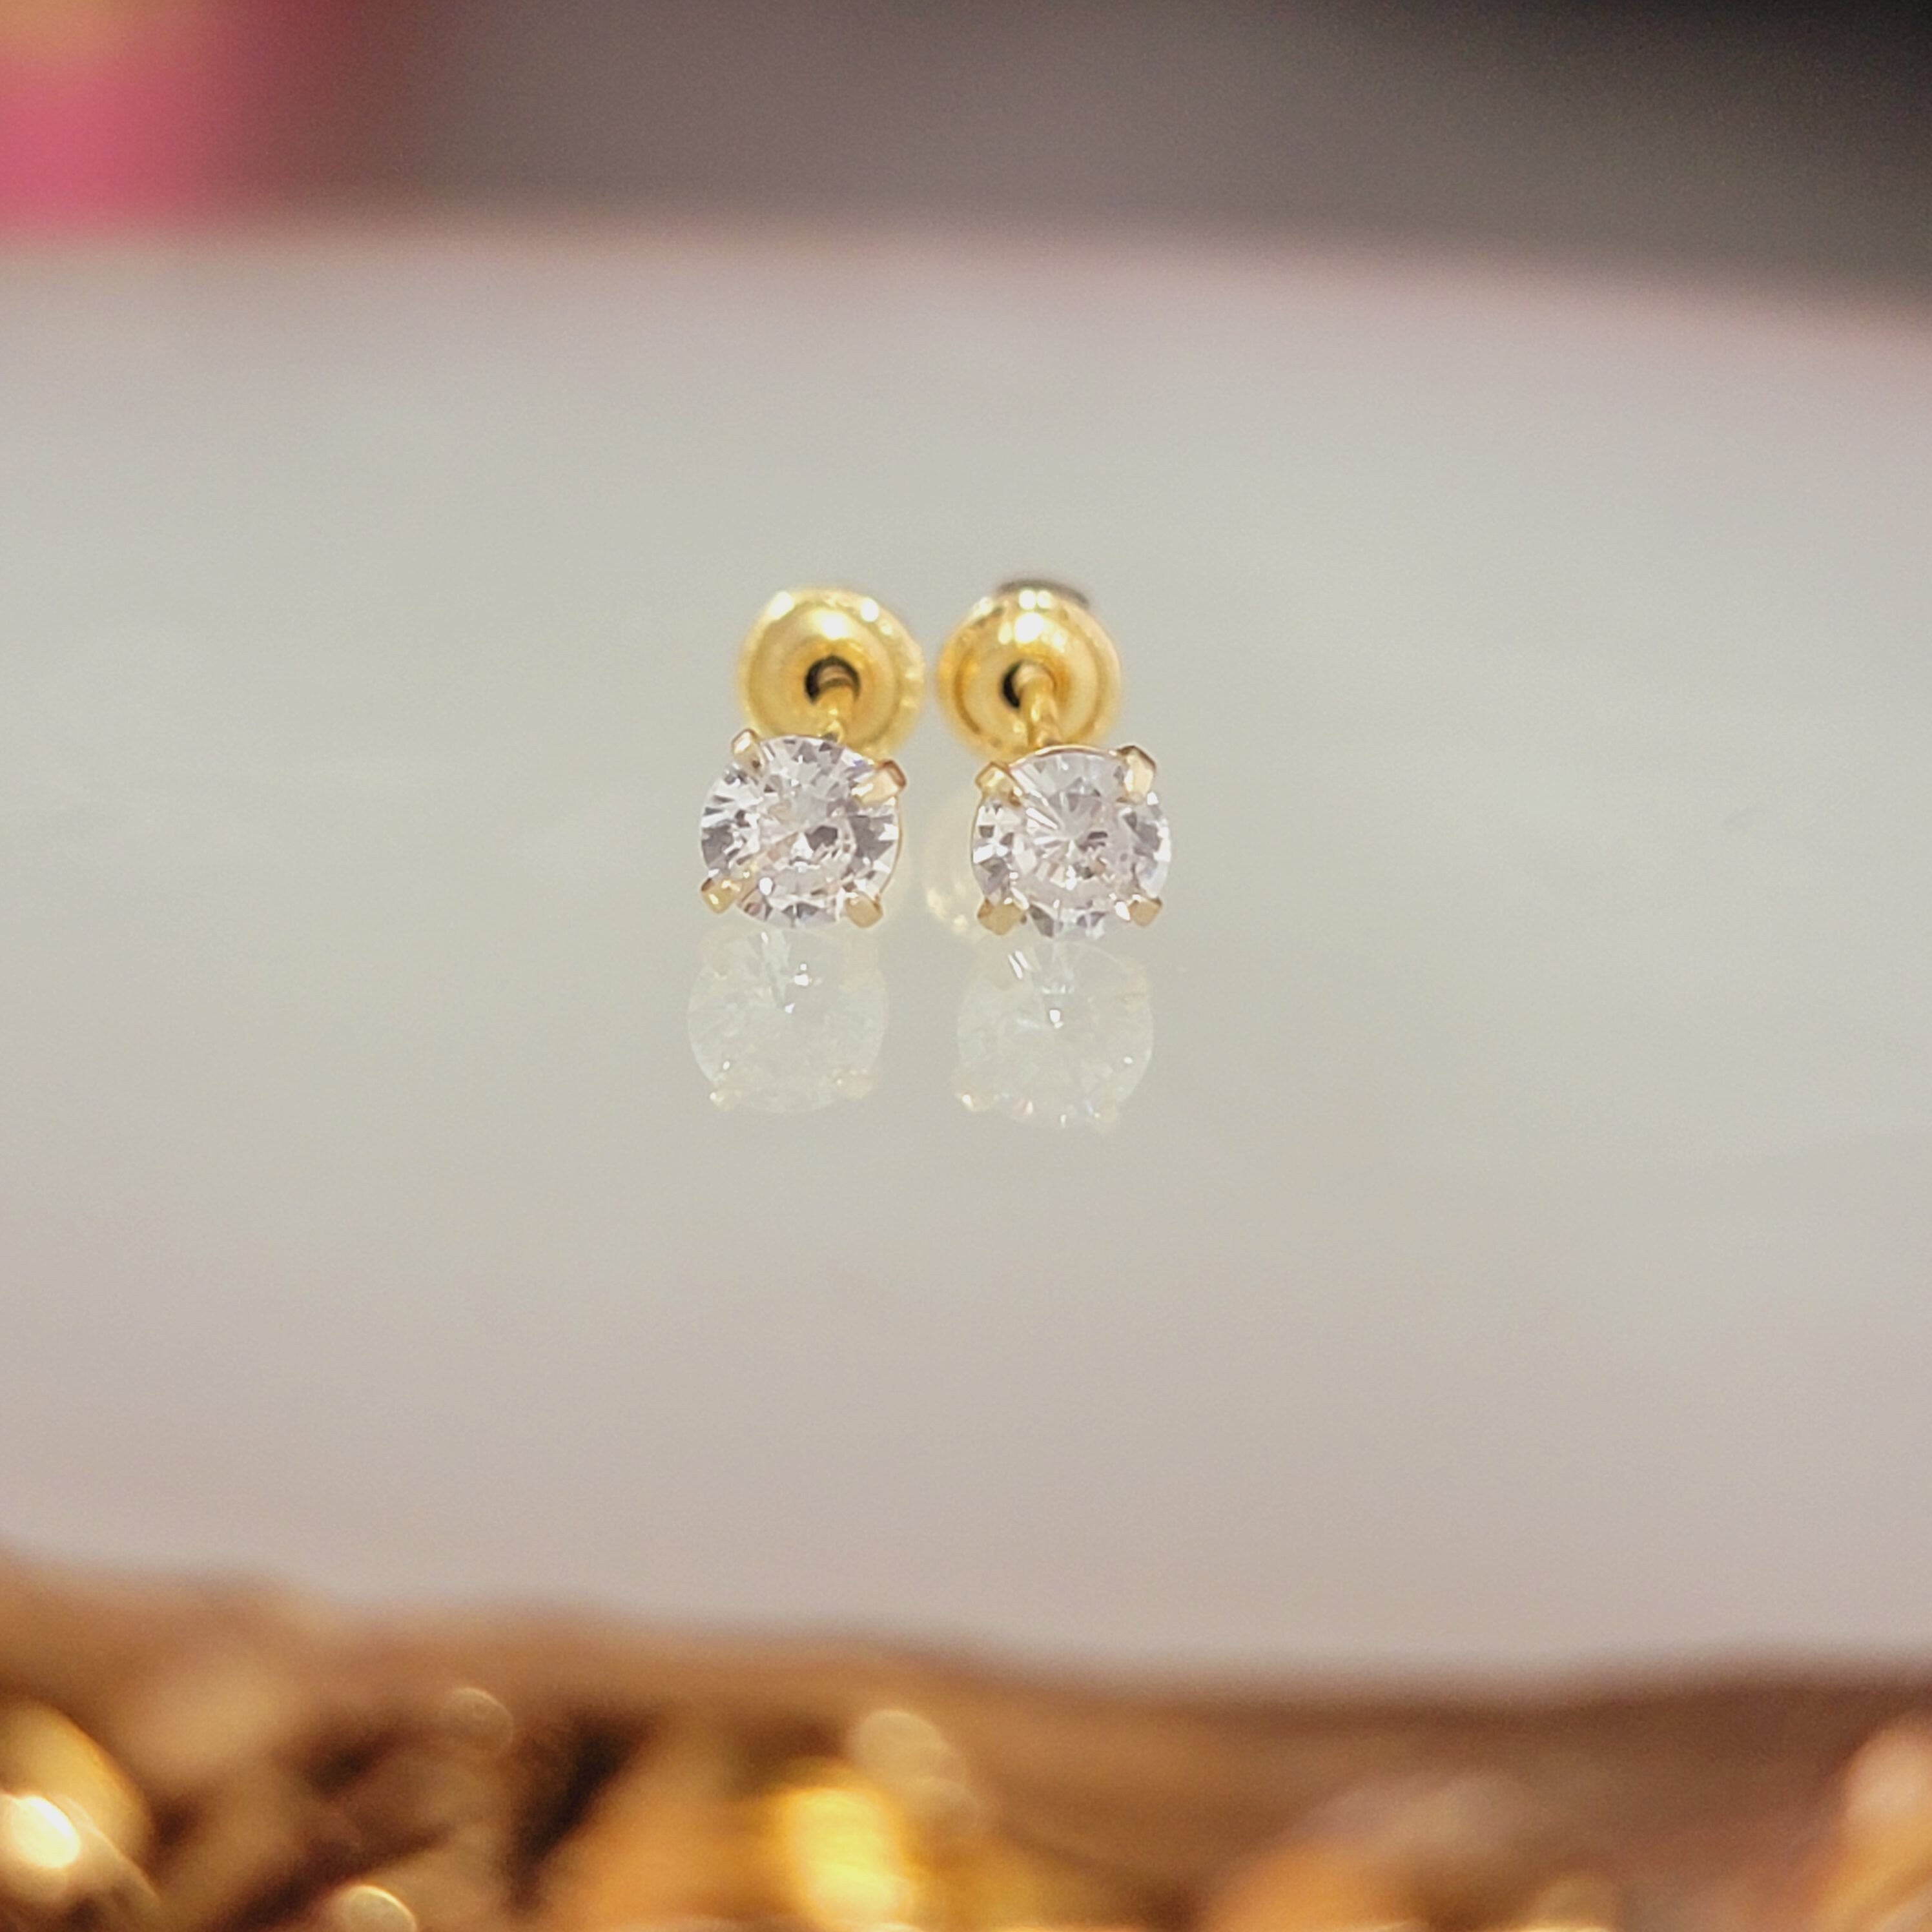 Baby/Kids Diamond Earrings 1/5 TCW | 14K Gold - The Jeweled Lullaby